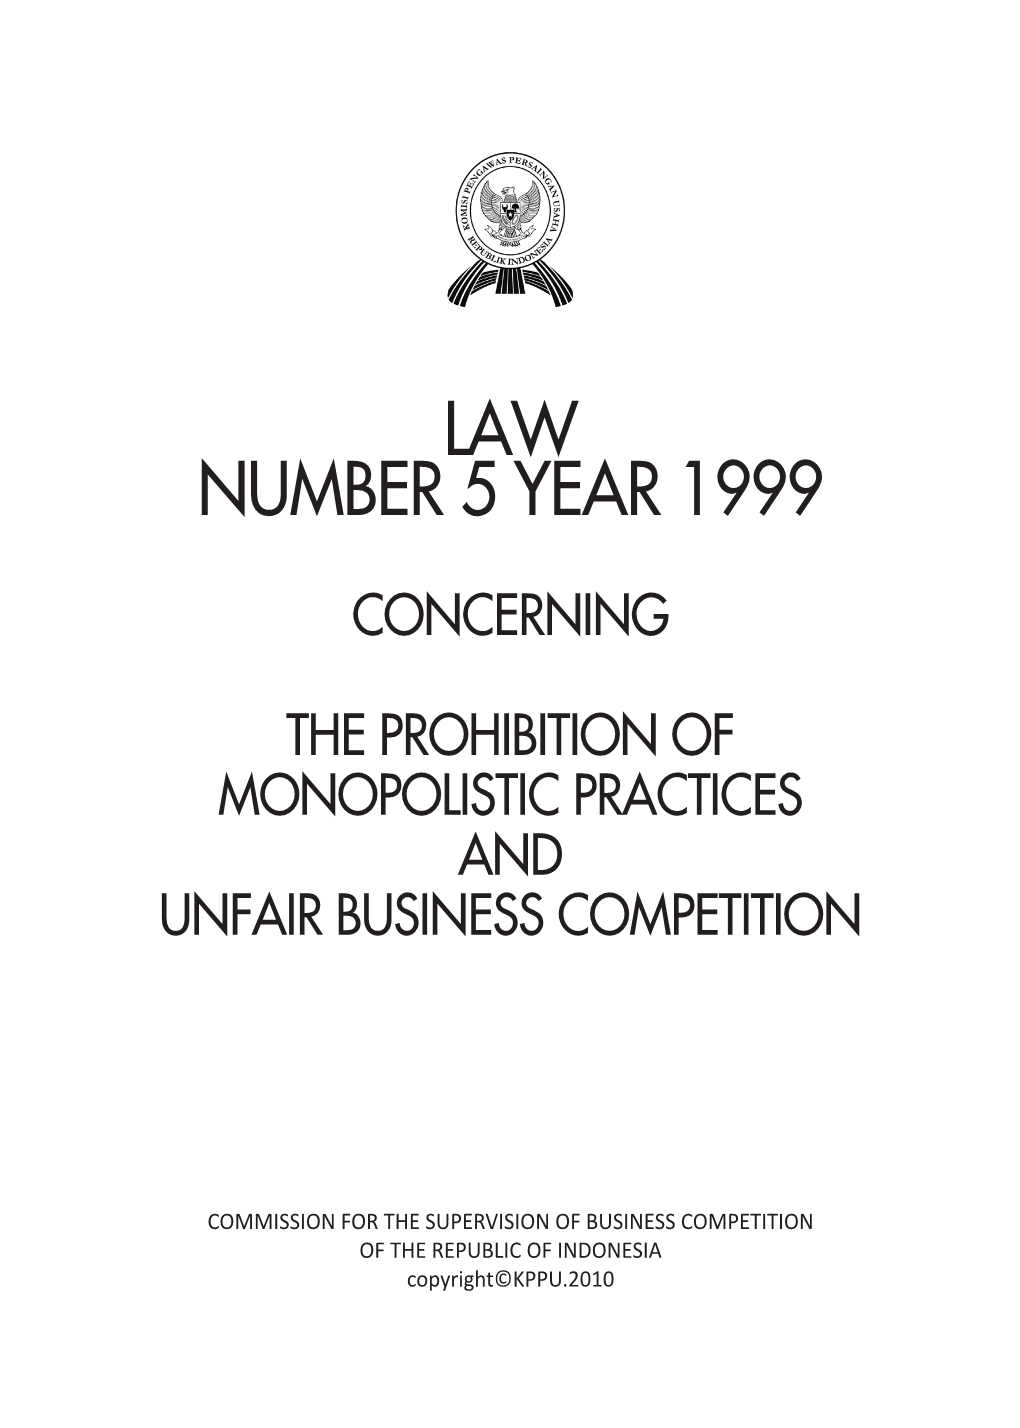 Law Number 5 Year 1999